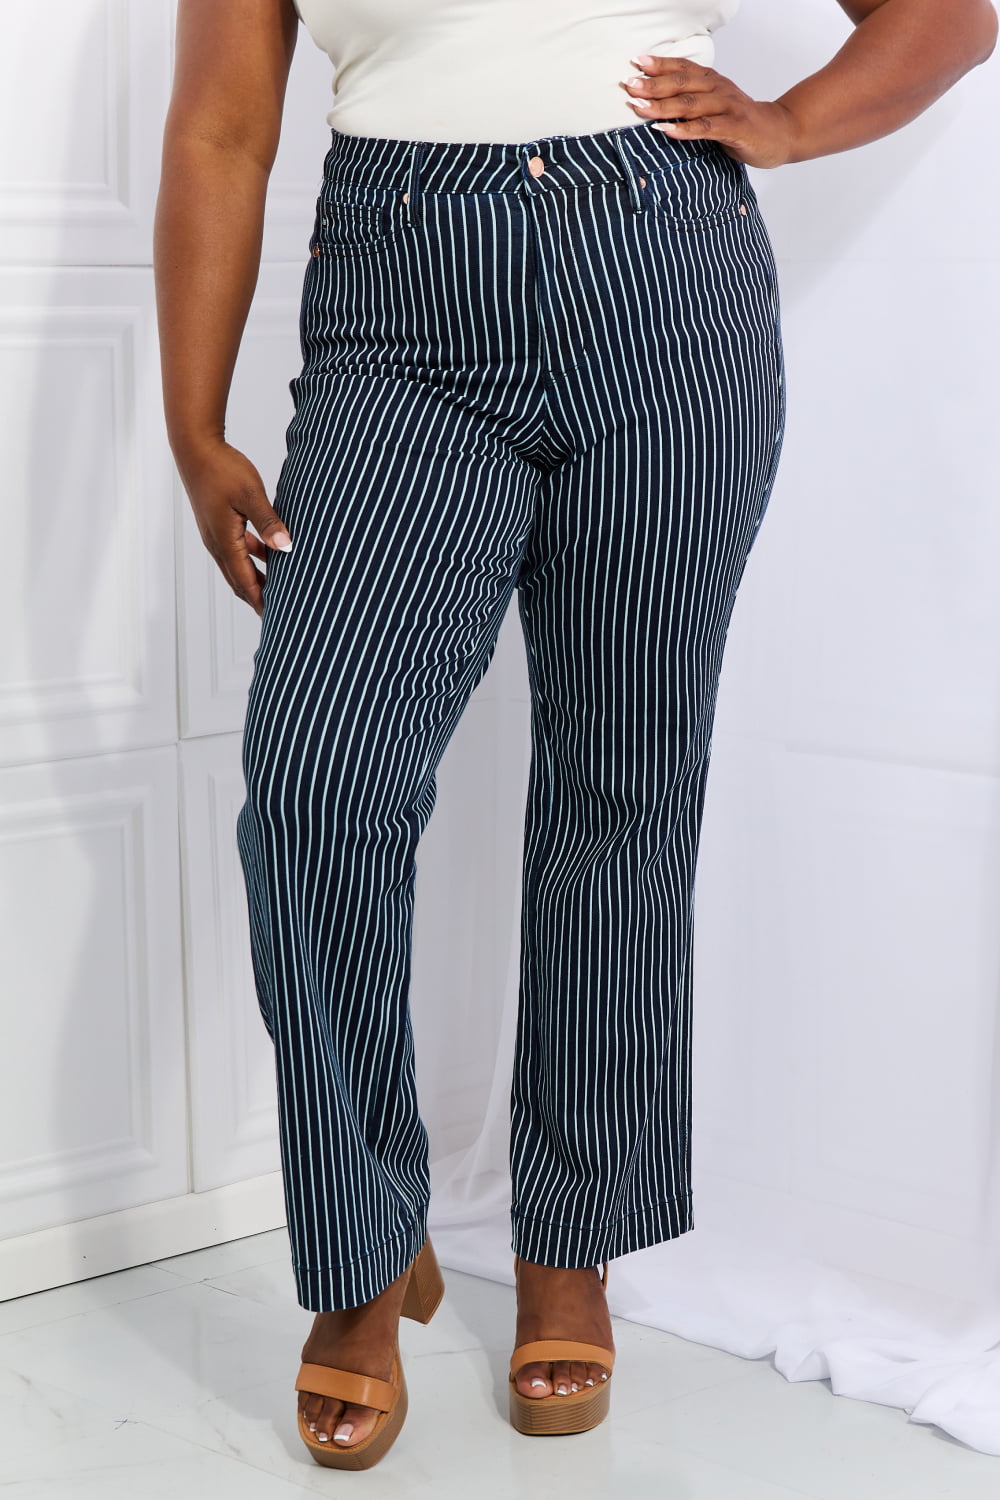 Judy Blue Cassidy High Waisted Tummy Control Striped Straight Jeans - FunkyPeacockStore (Store description)